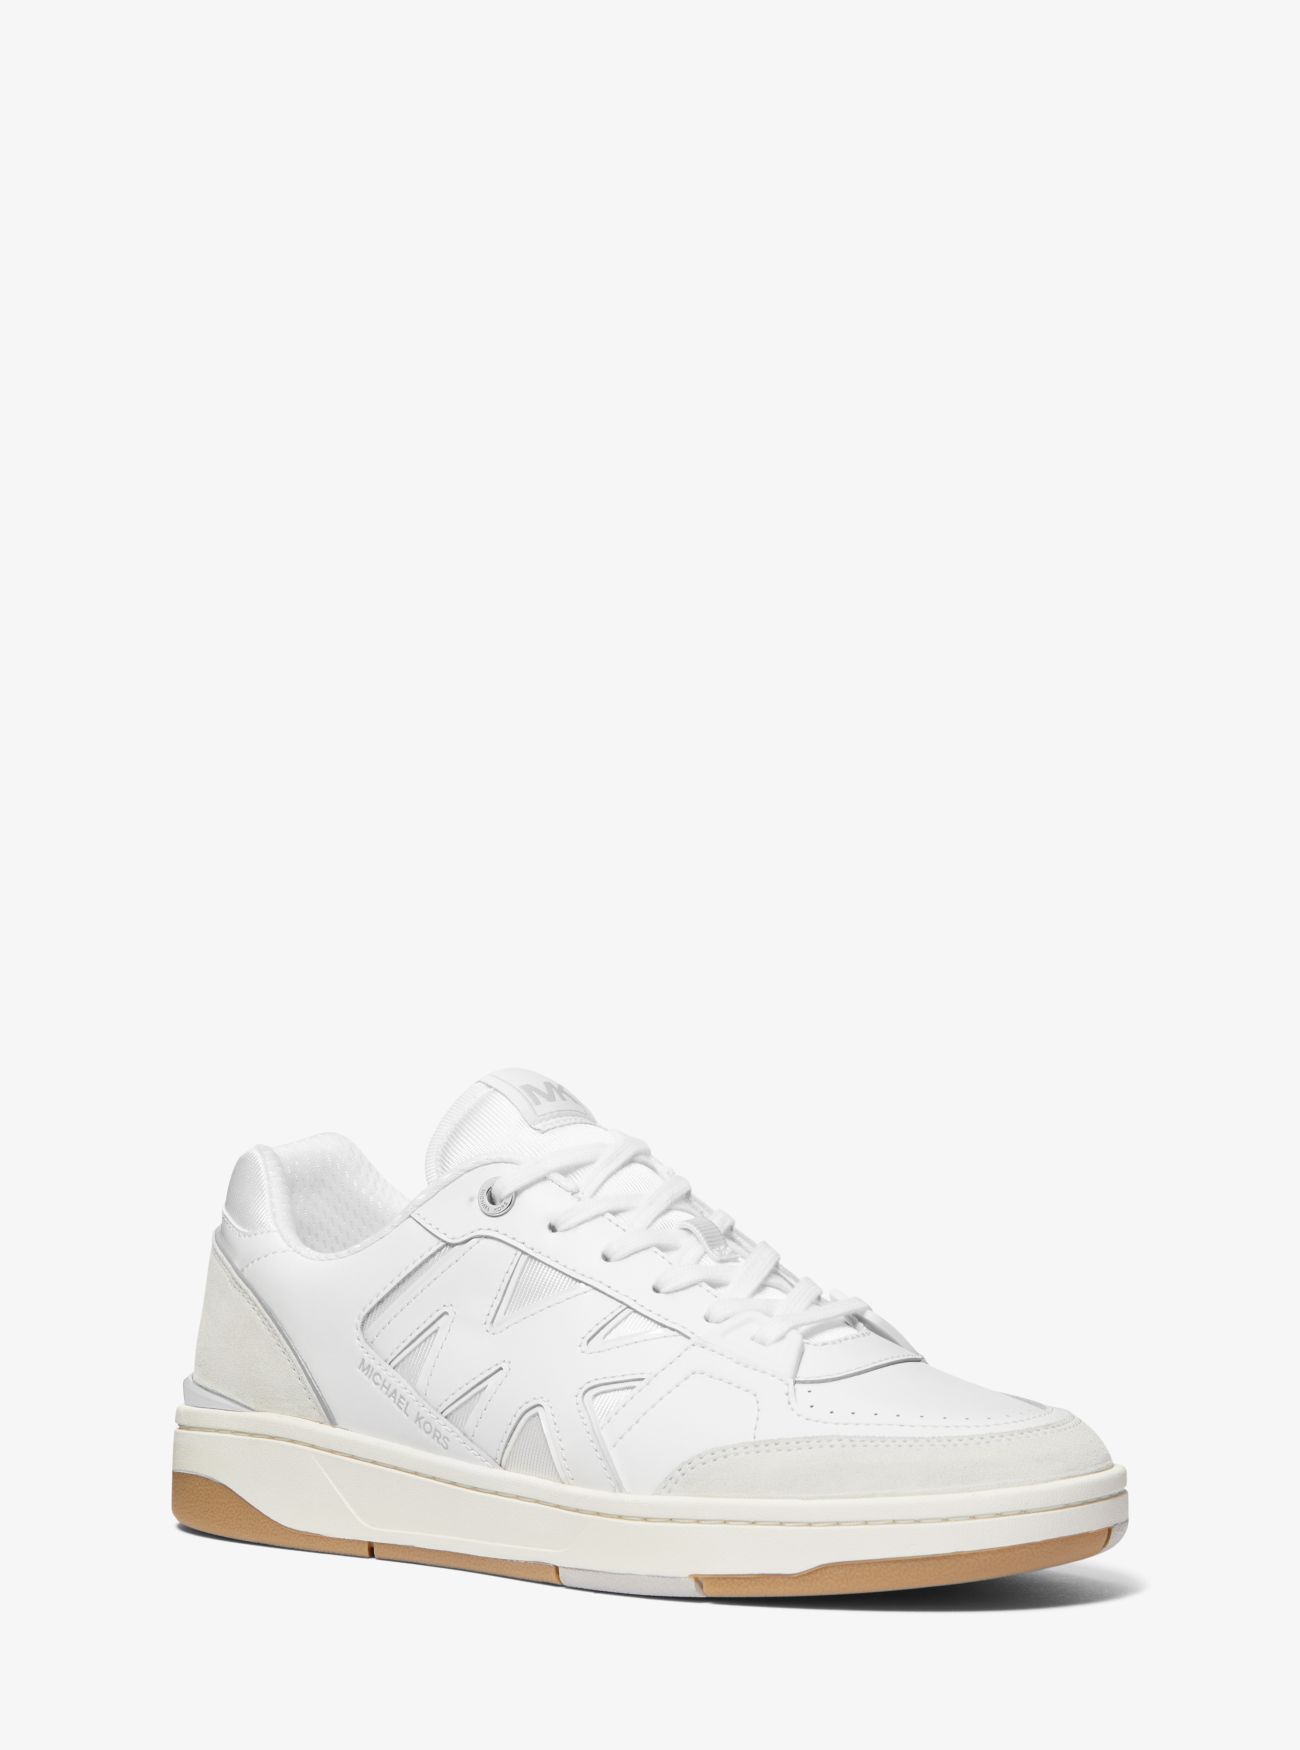 MK Rebel Leather Trainers - Opwht Multi - Michael Kors